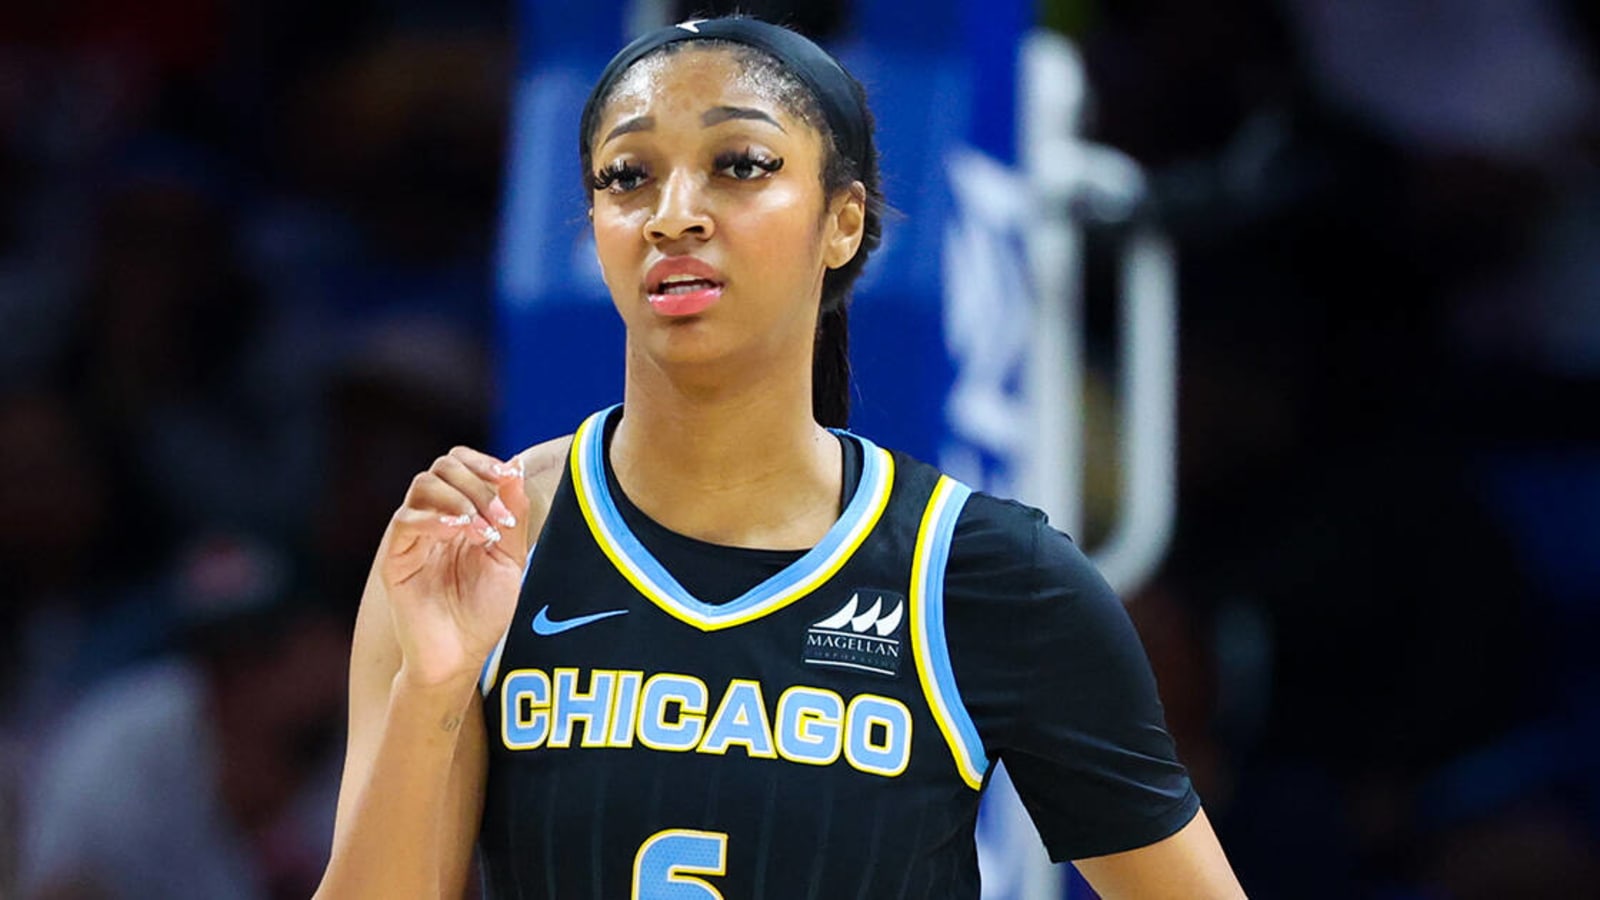 Angel Reese scores first WNBA point for Chicago Sky on free throw vs. Dallas Wings